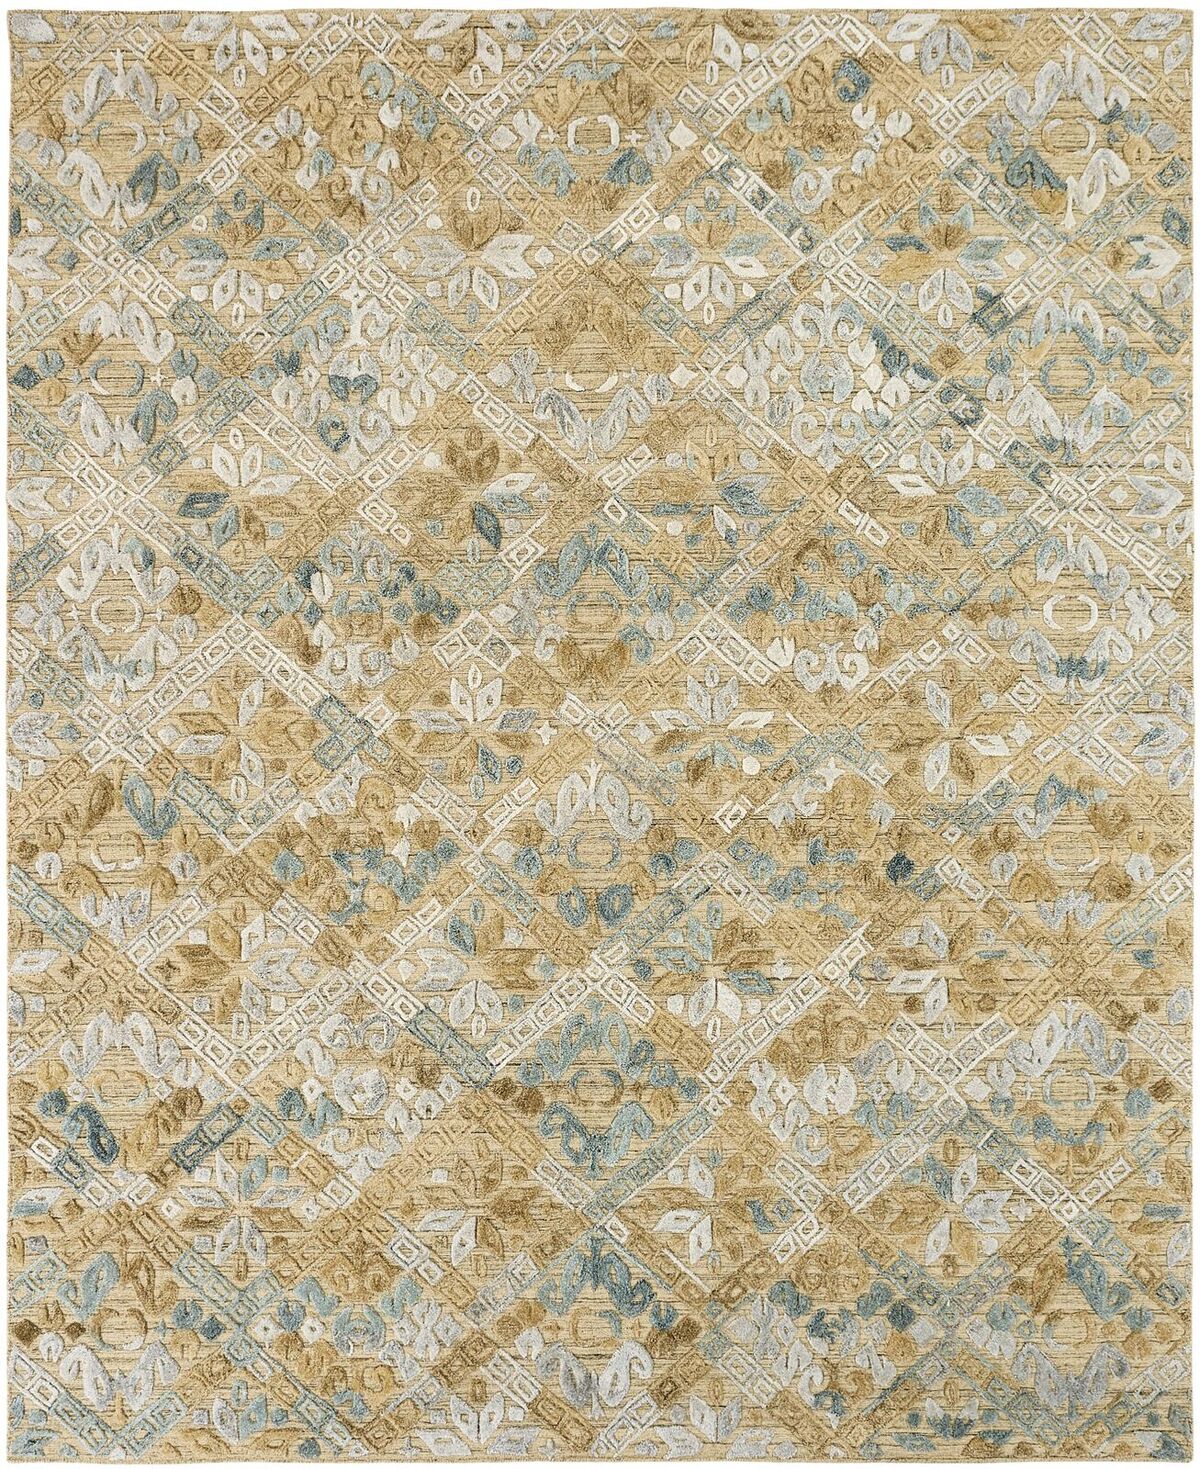 Hand-knotted area rug with geometric pattern in greys, blues and browns.